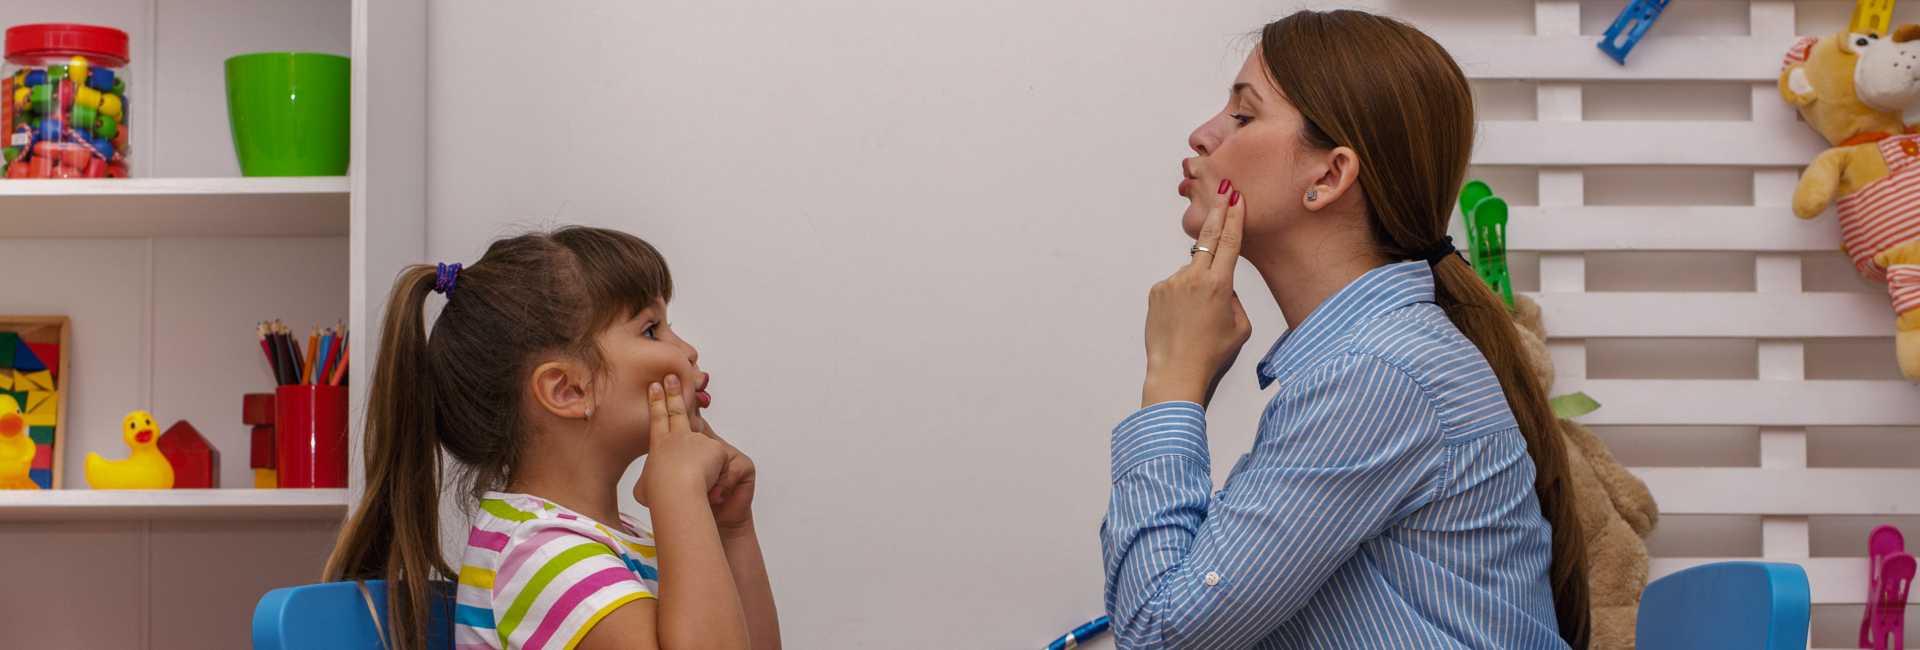 a woman and a child make a face to eachother while pressing their fingers into their cheeks, indicative of speech therapy